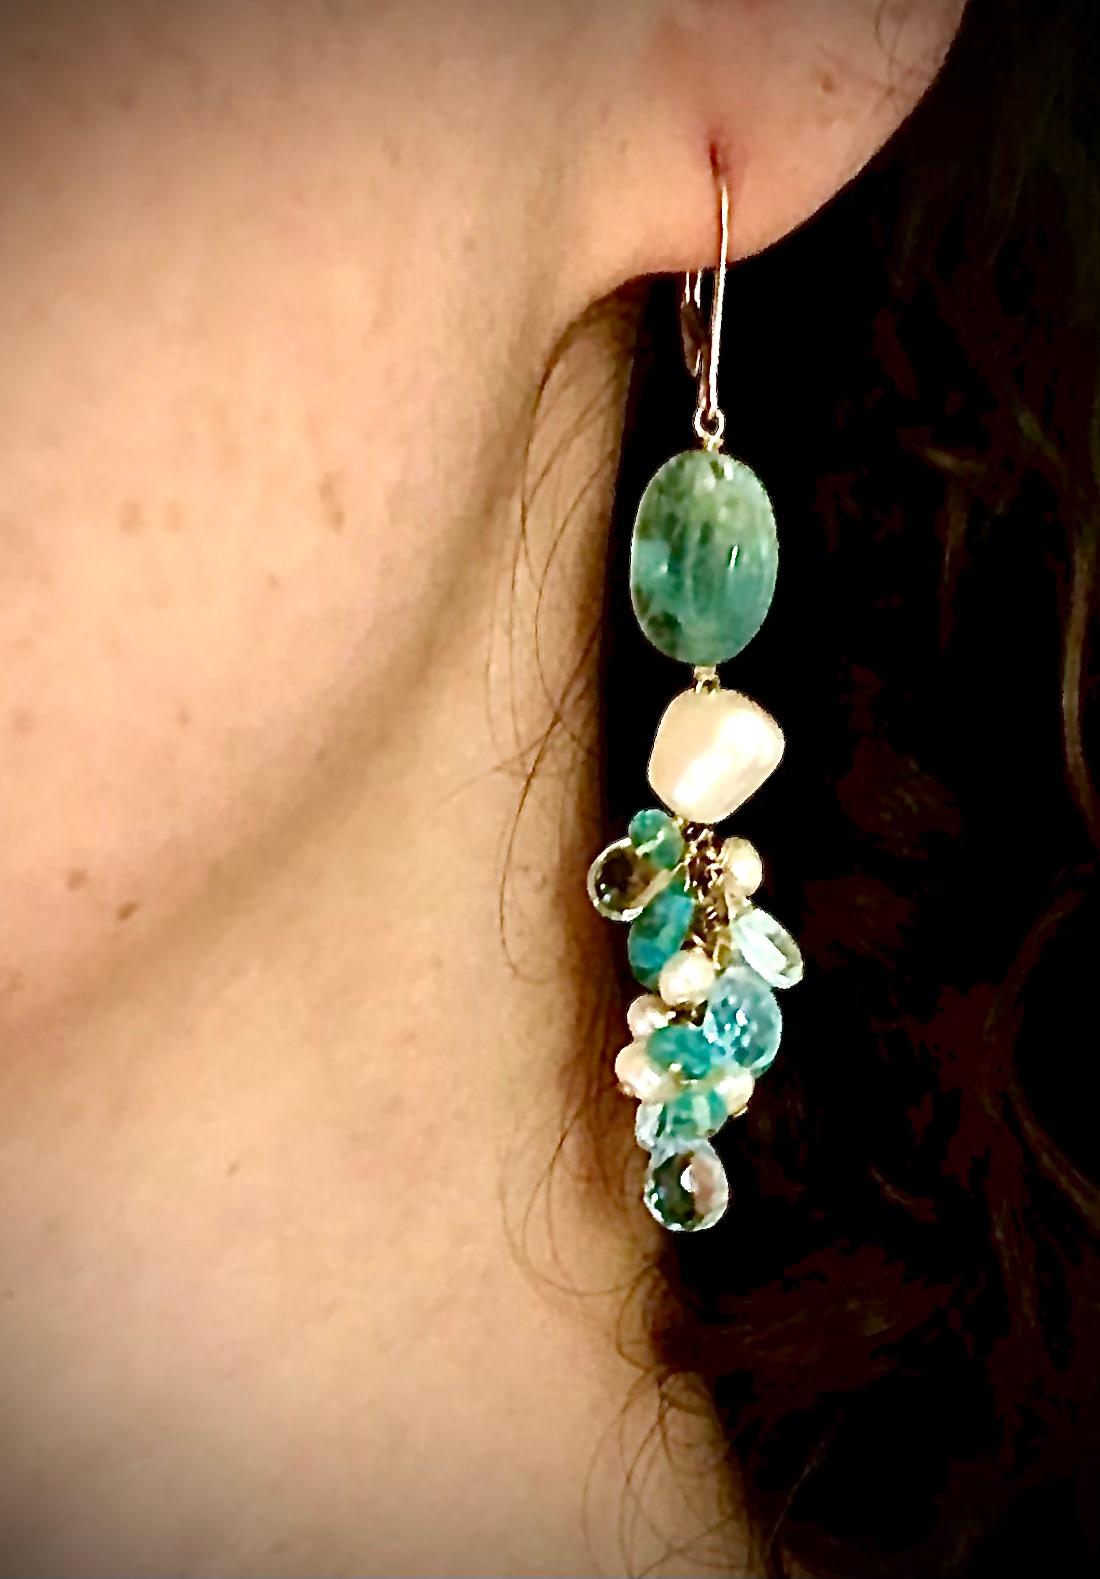 Pair of aquamarine earrings. Large tumbled aquamarines, smooth and faceted aquamarines briolettes, blue topaz briolettes. White freshwater pearls and 14kt white gold.